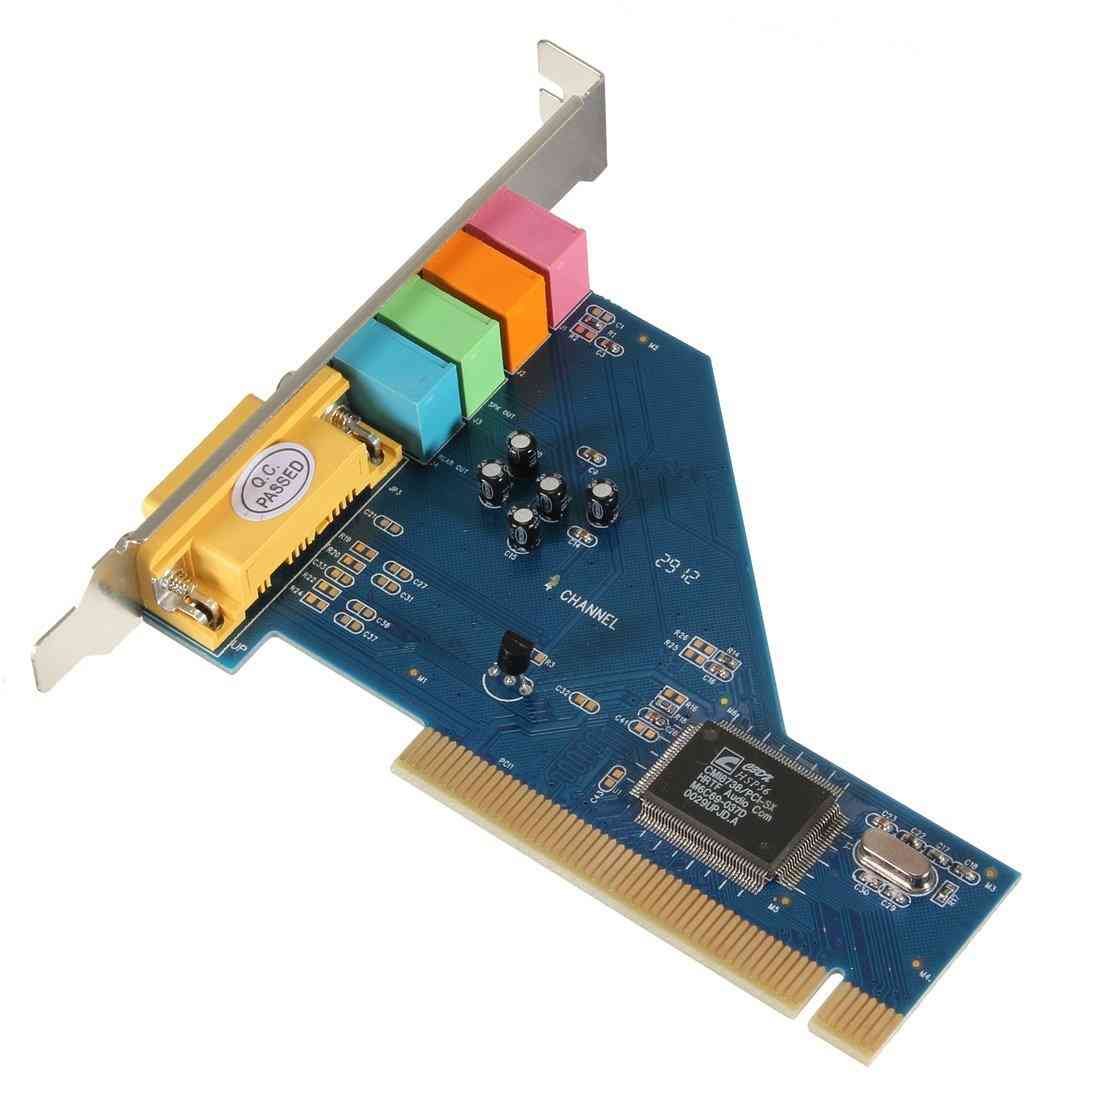 4 Channel, 3d Audio Stereo - Pci Sound Card